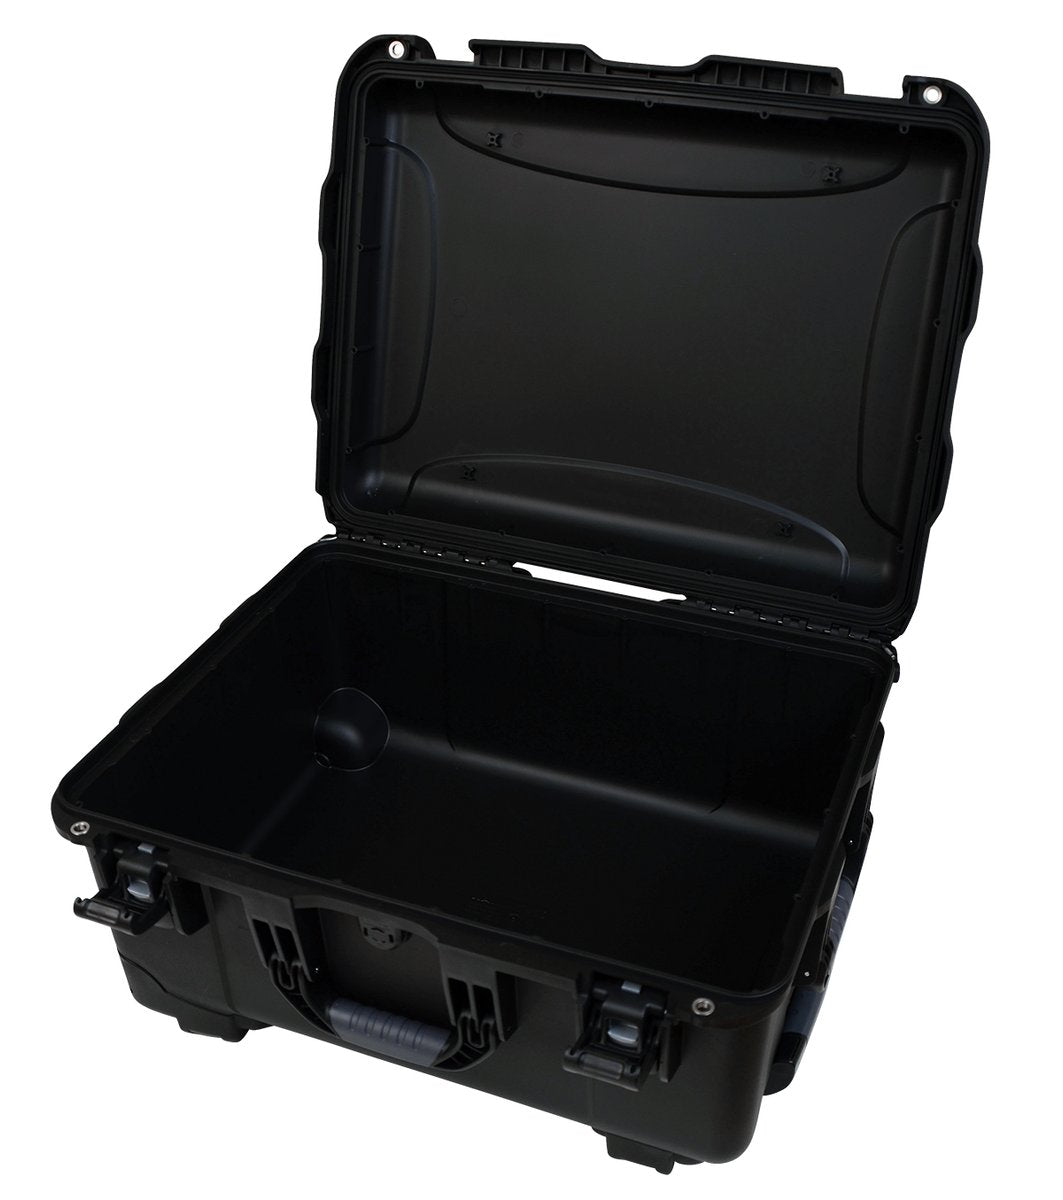 Black injection molded case with pullout handle, inline wheels, and Interior dims 20.5" x 15.3" x 10.1". NO FOAM